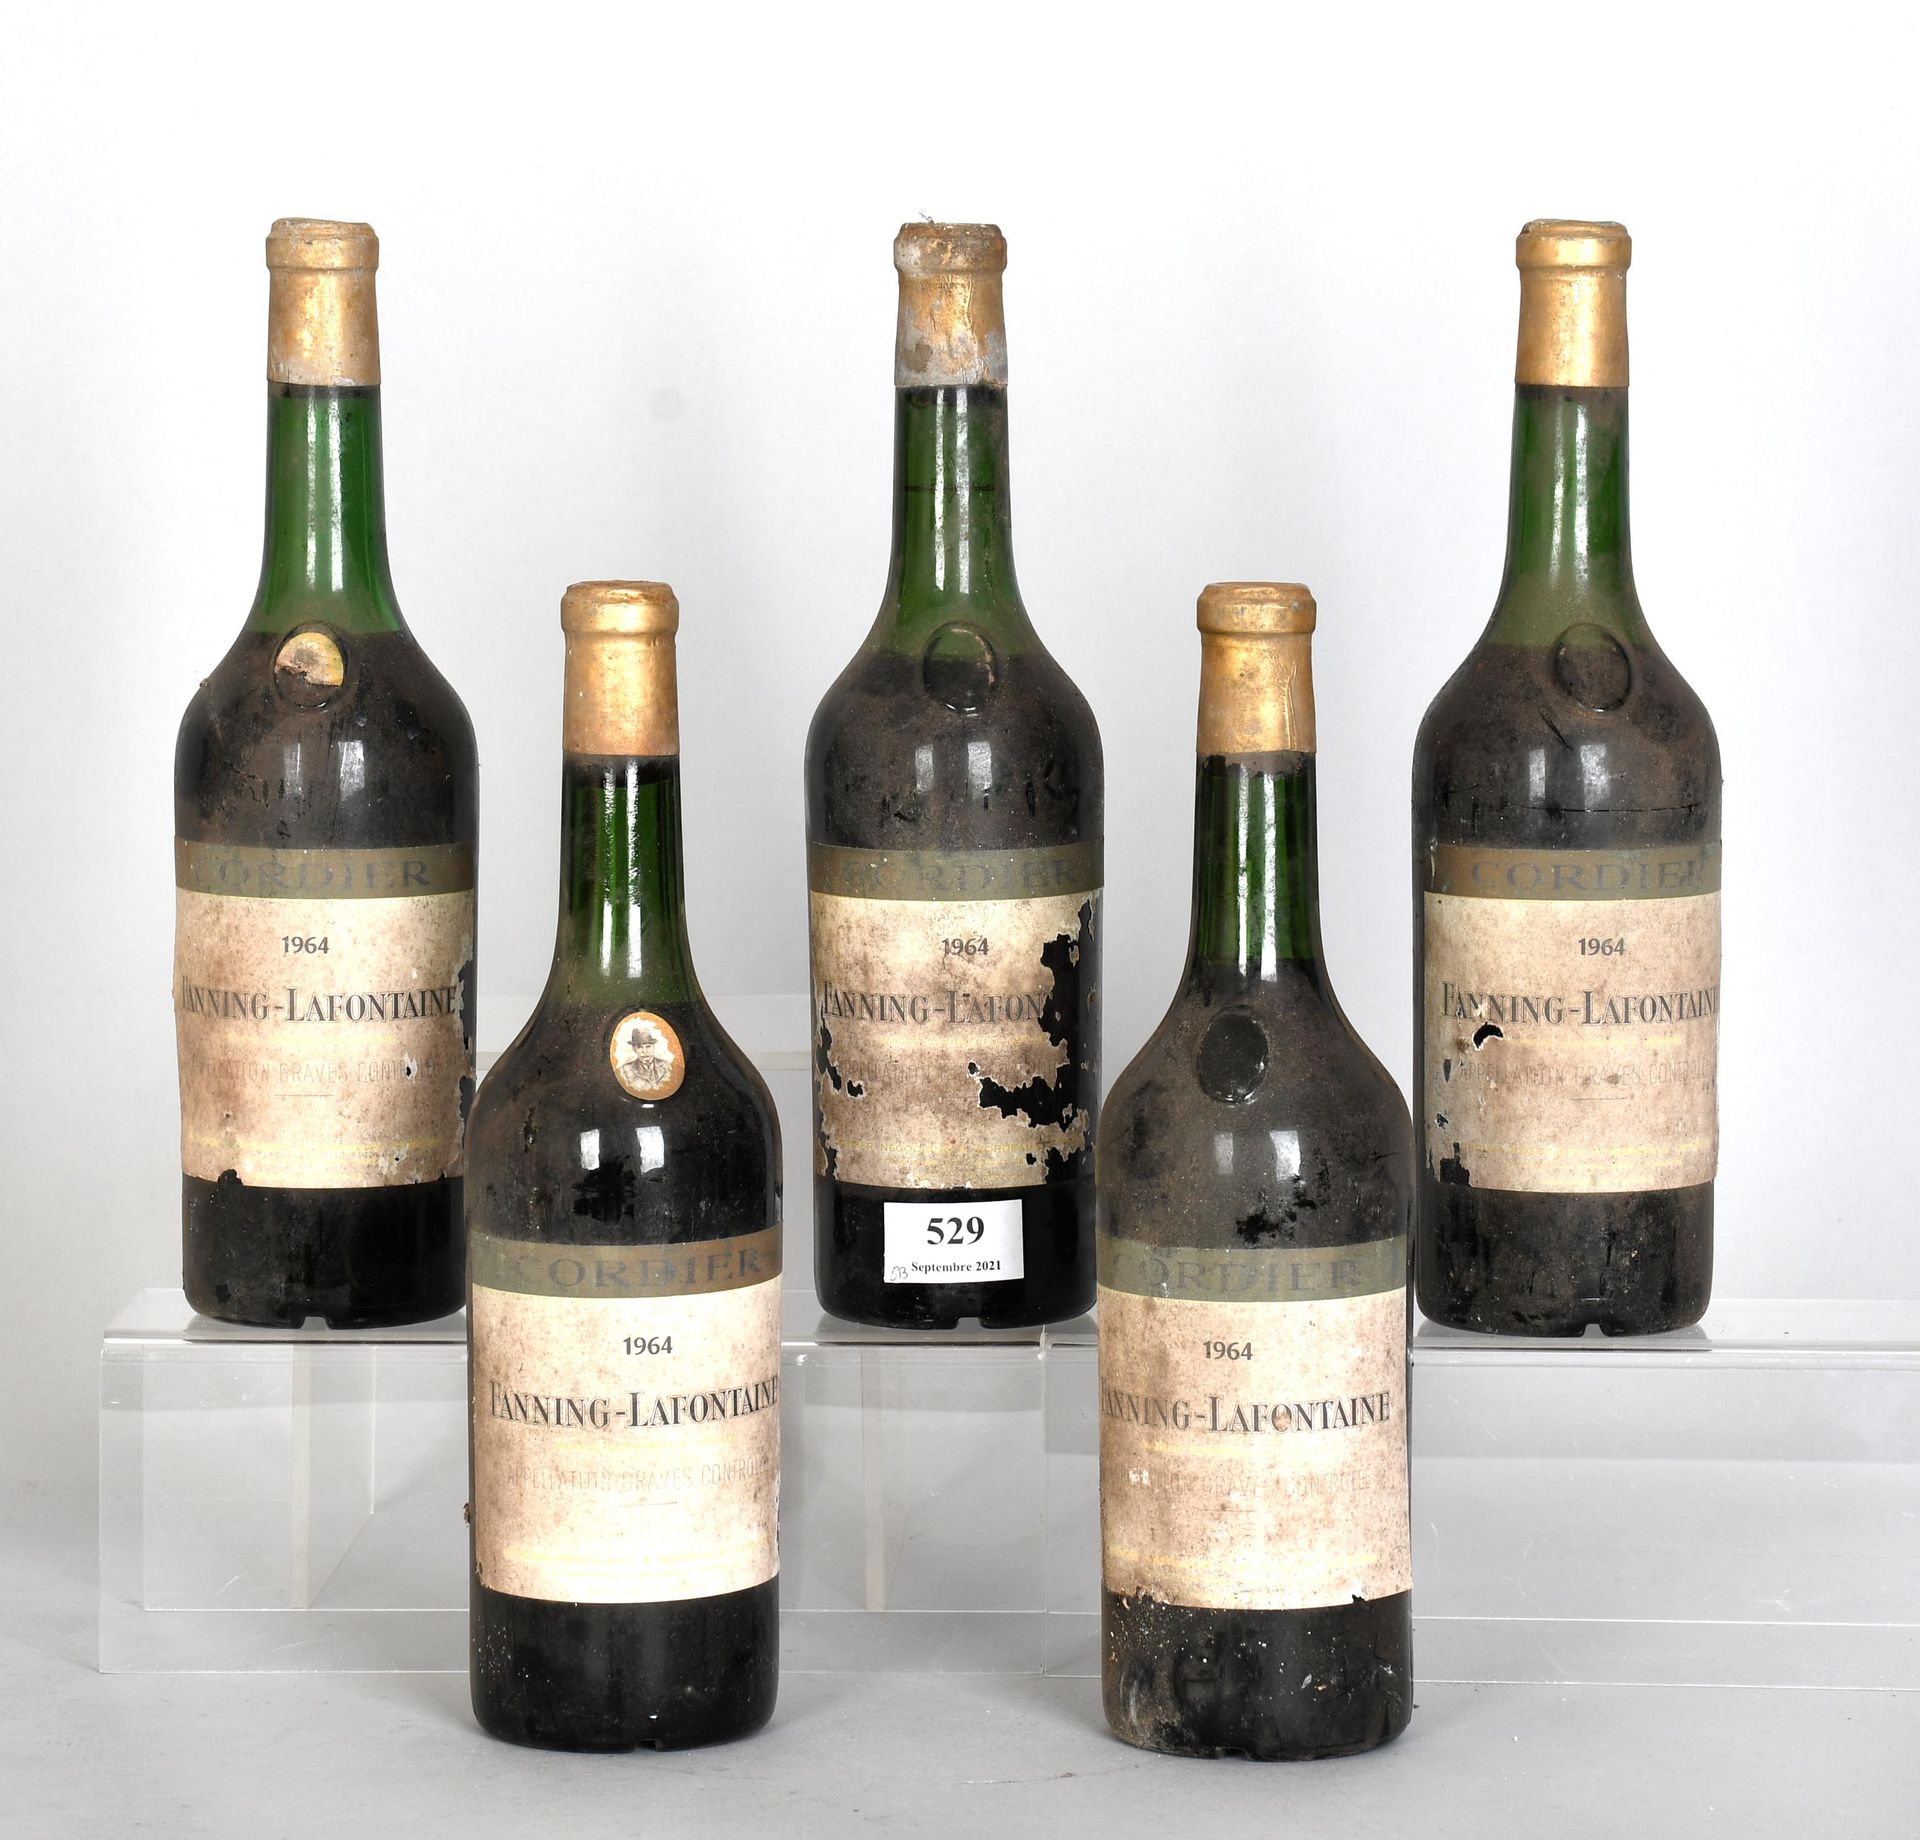 Null Fanning-Lafontaine 1964 - Five bottles of wine

Graves. Decreases in level.&hellip;